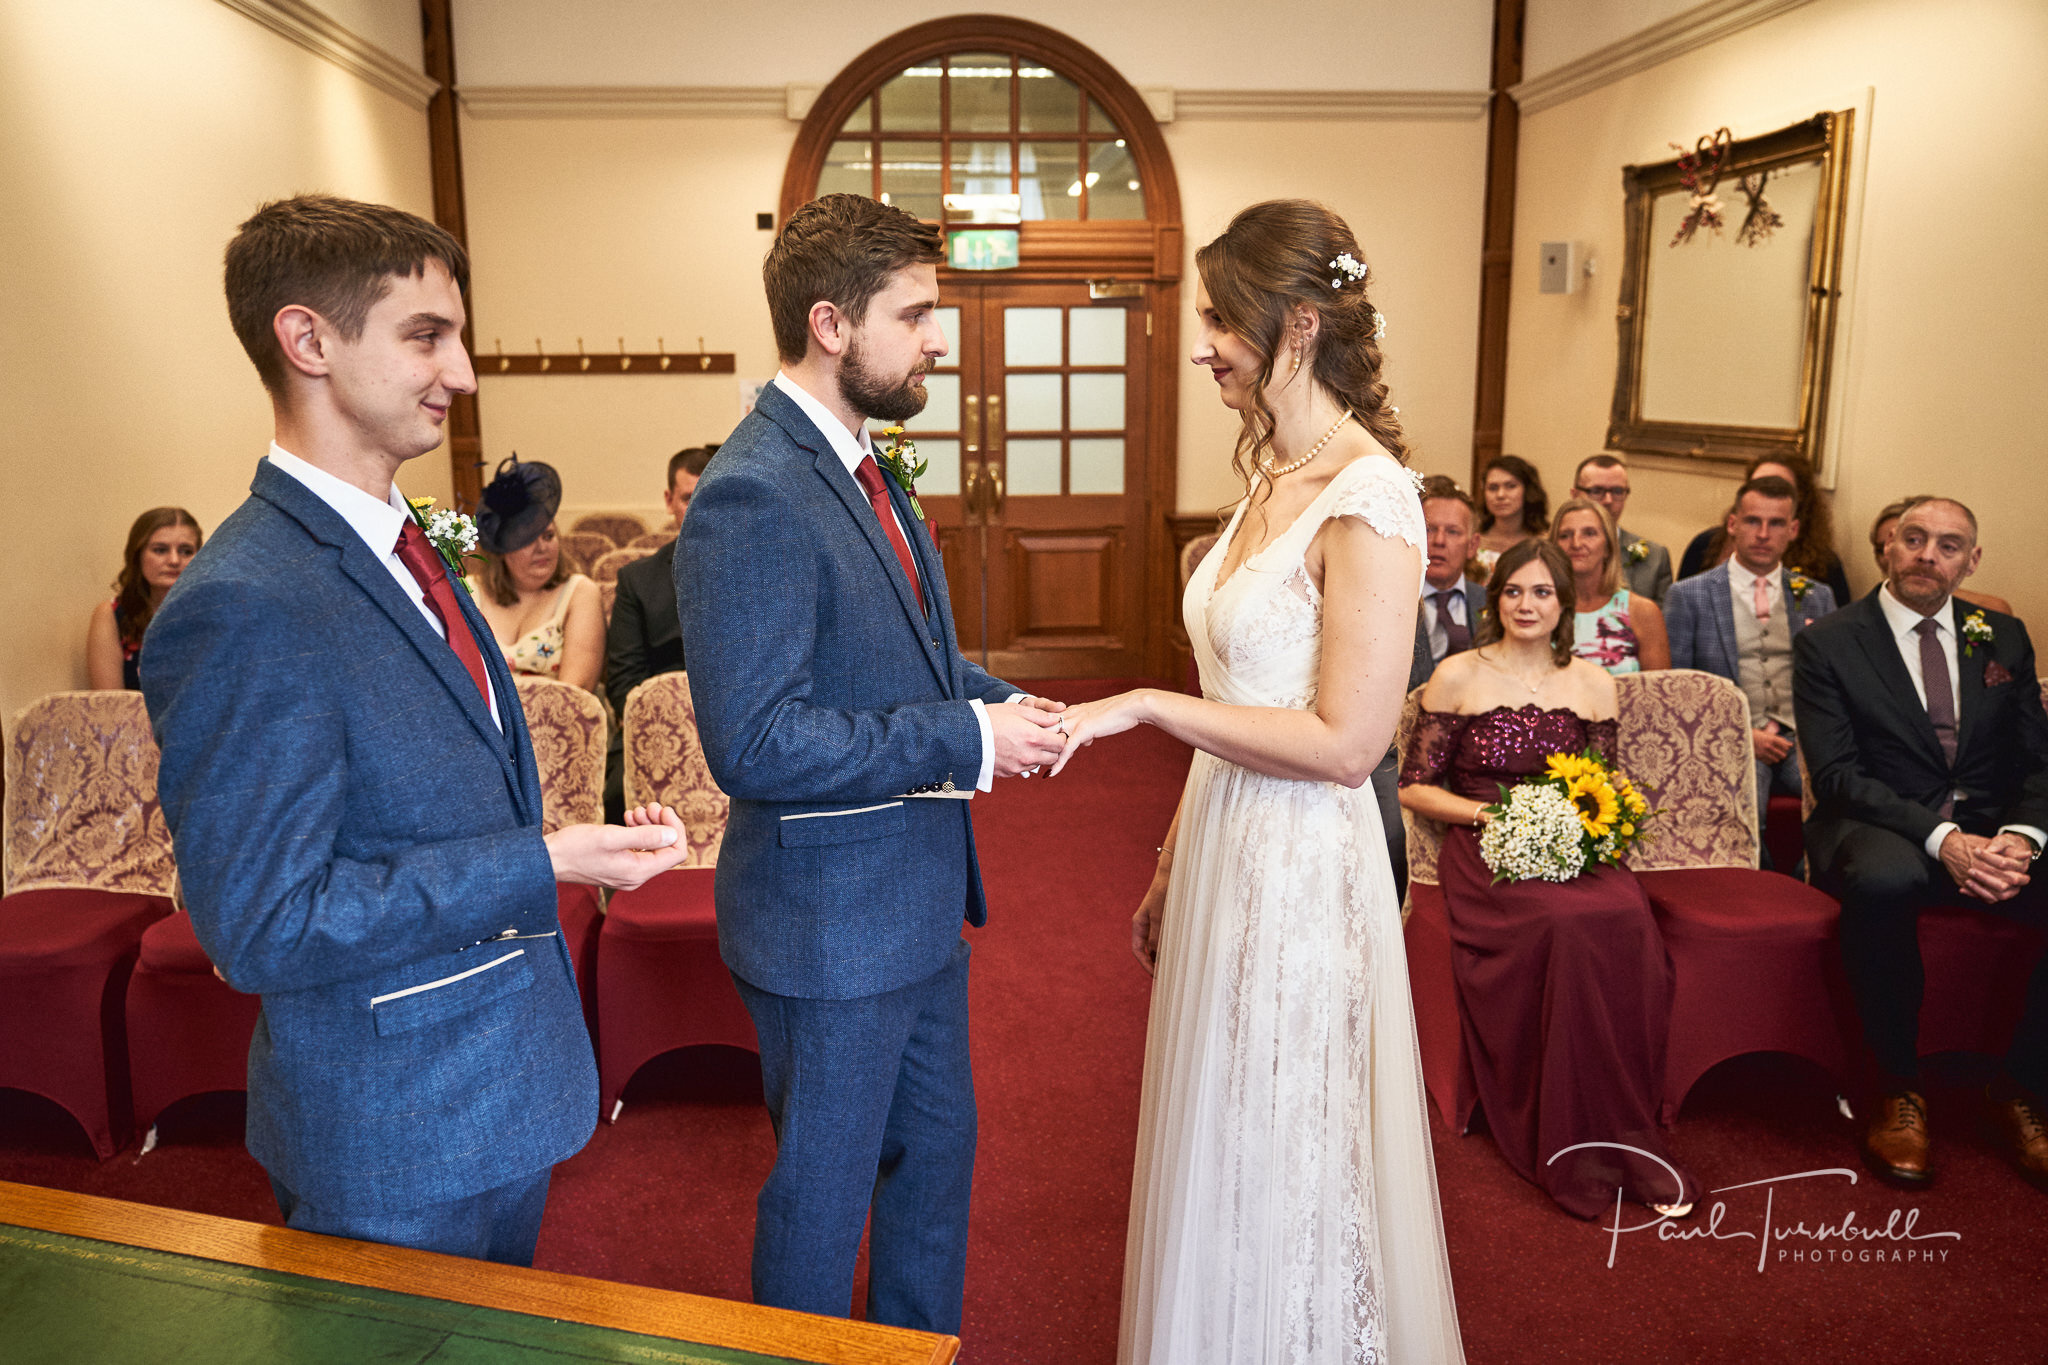 Exchanging Rings. Wedding Photography at Sheffield Town Hall